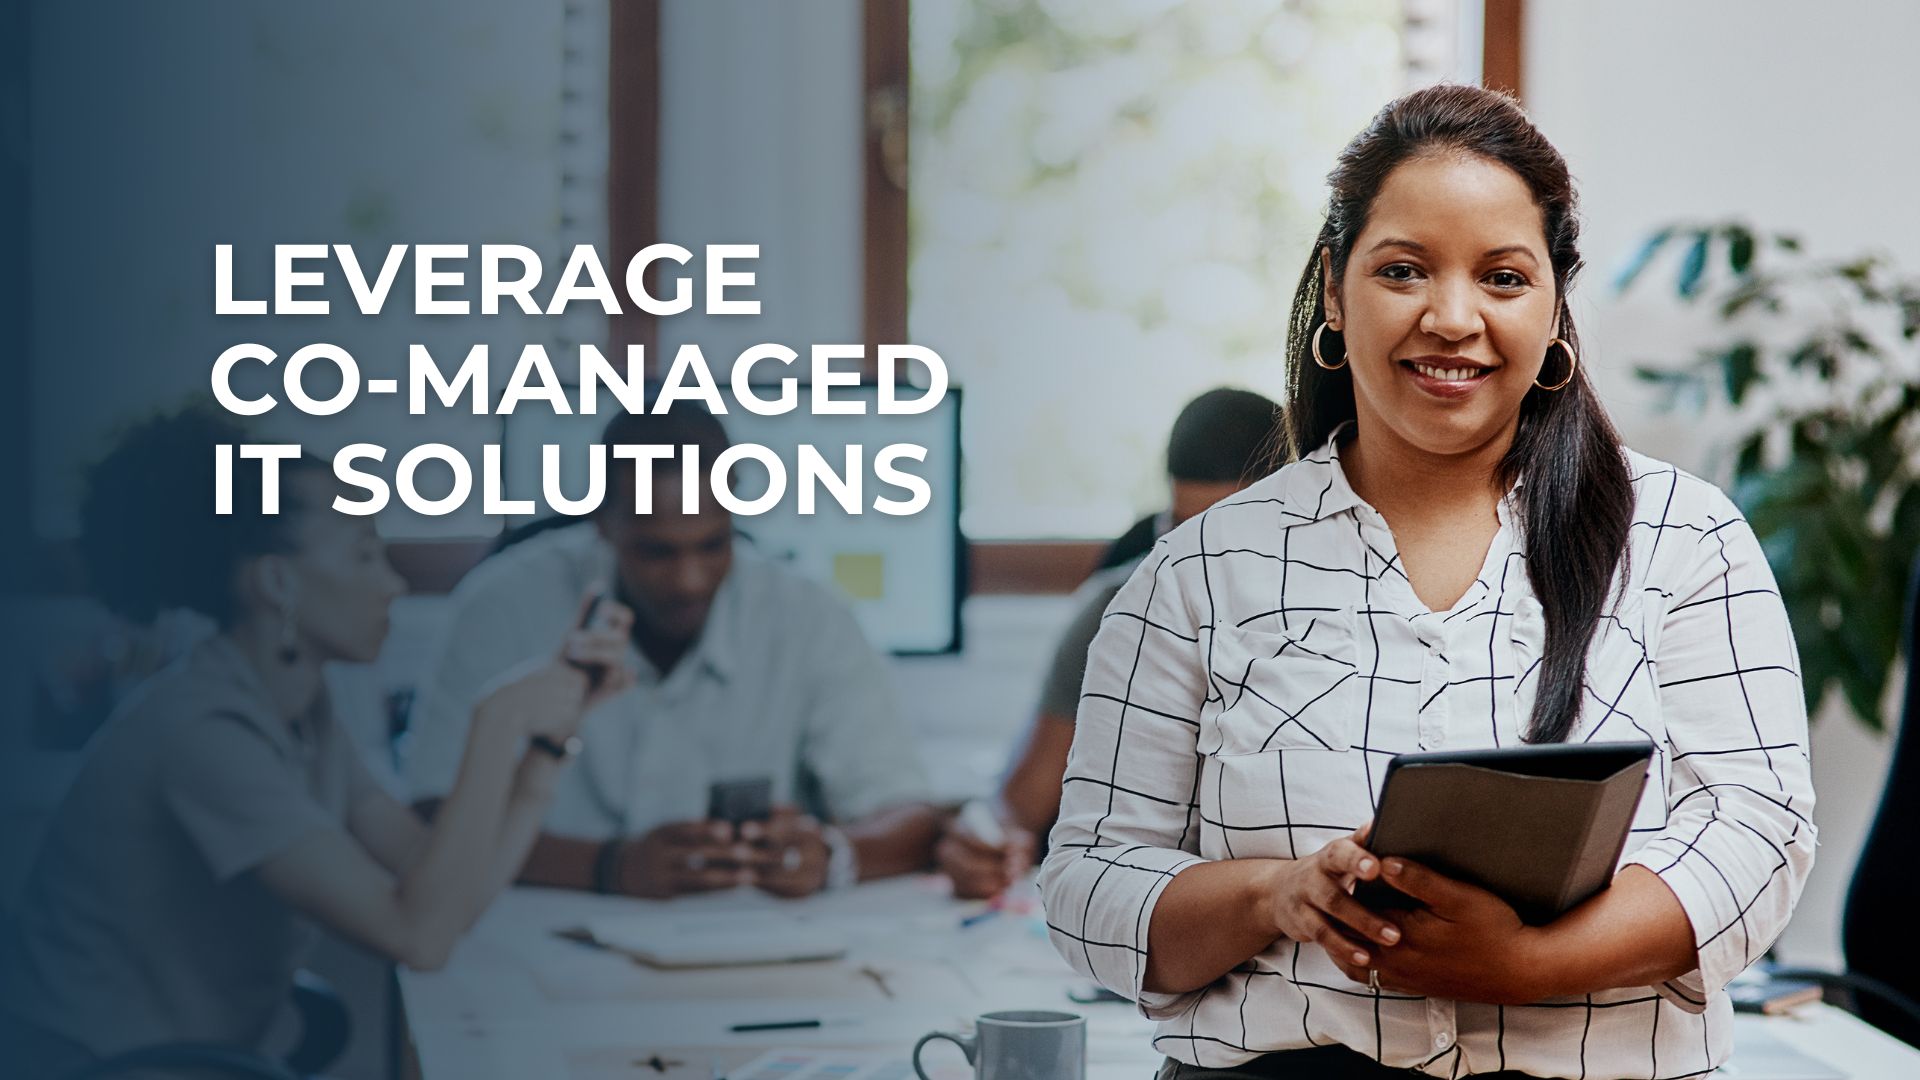 Leverage Co-Managed IT Solutions